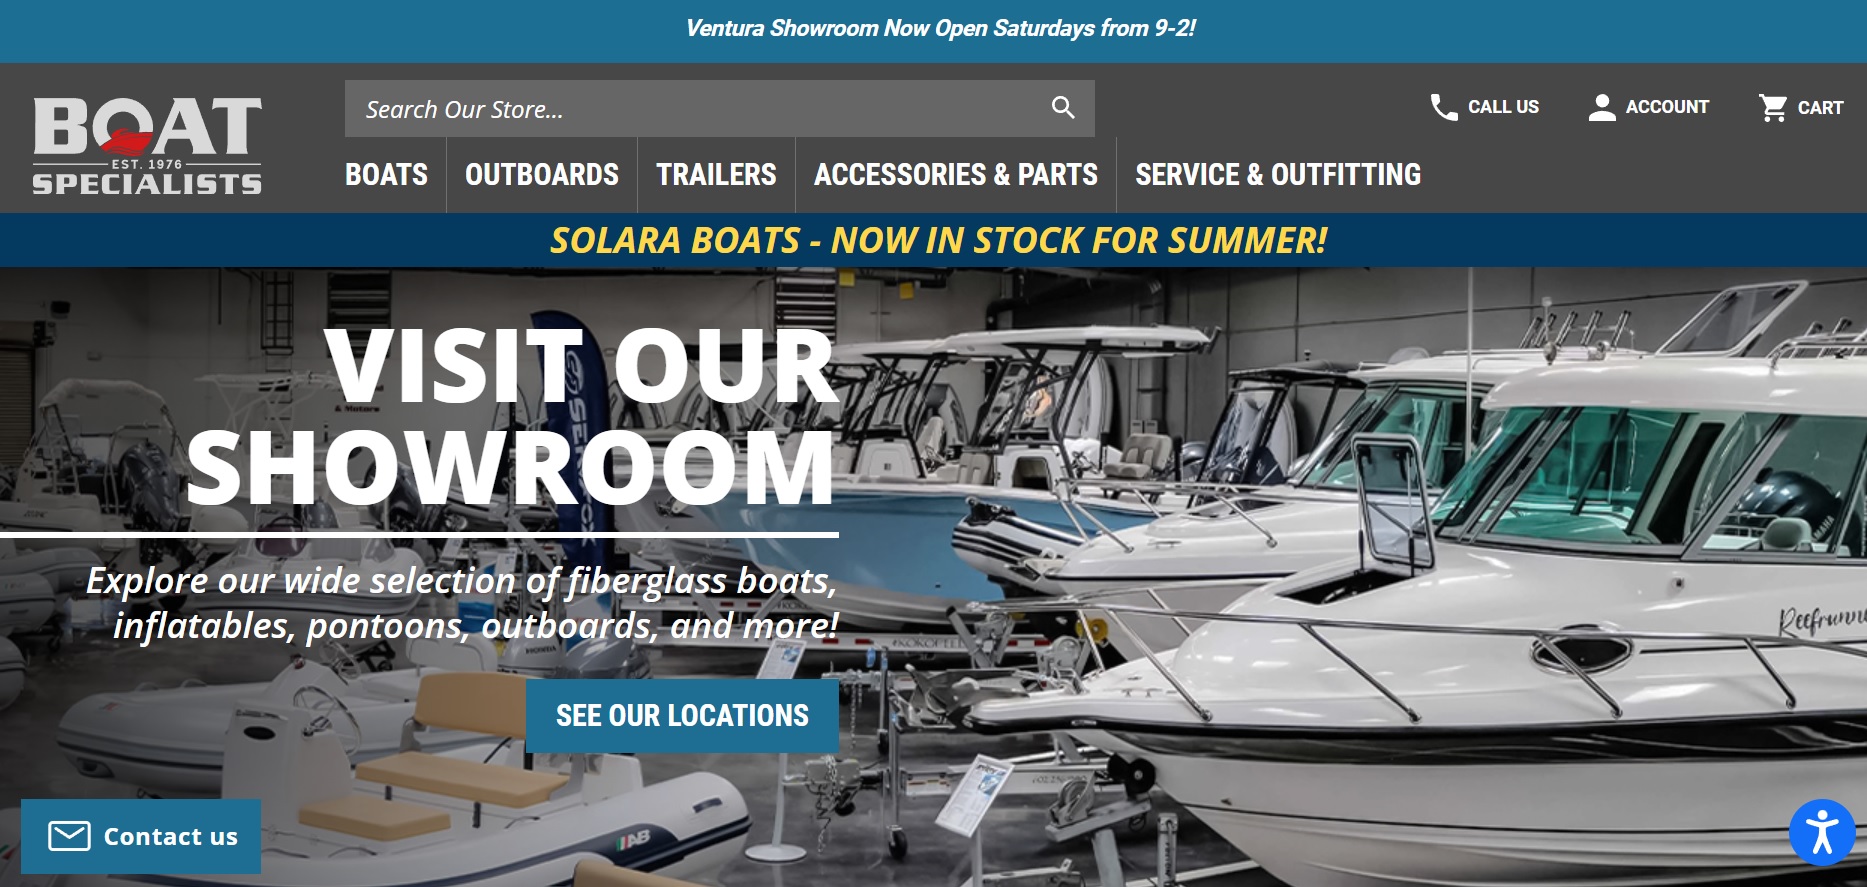 Boat Specialists - Social Media in Boat Service and Repair Shops